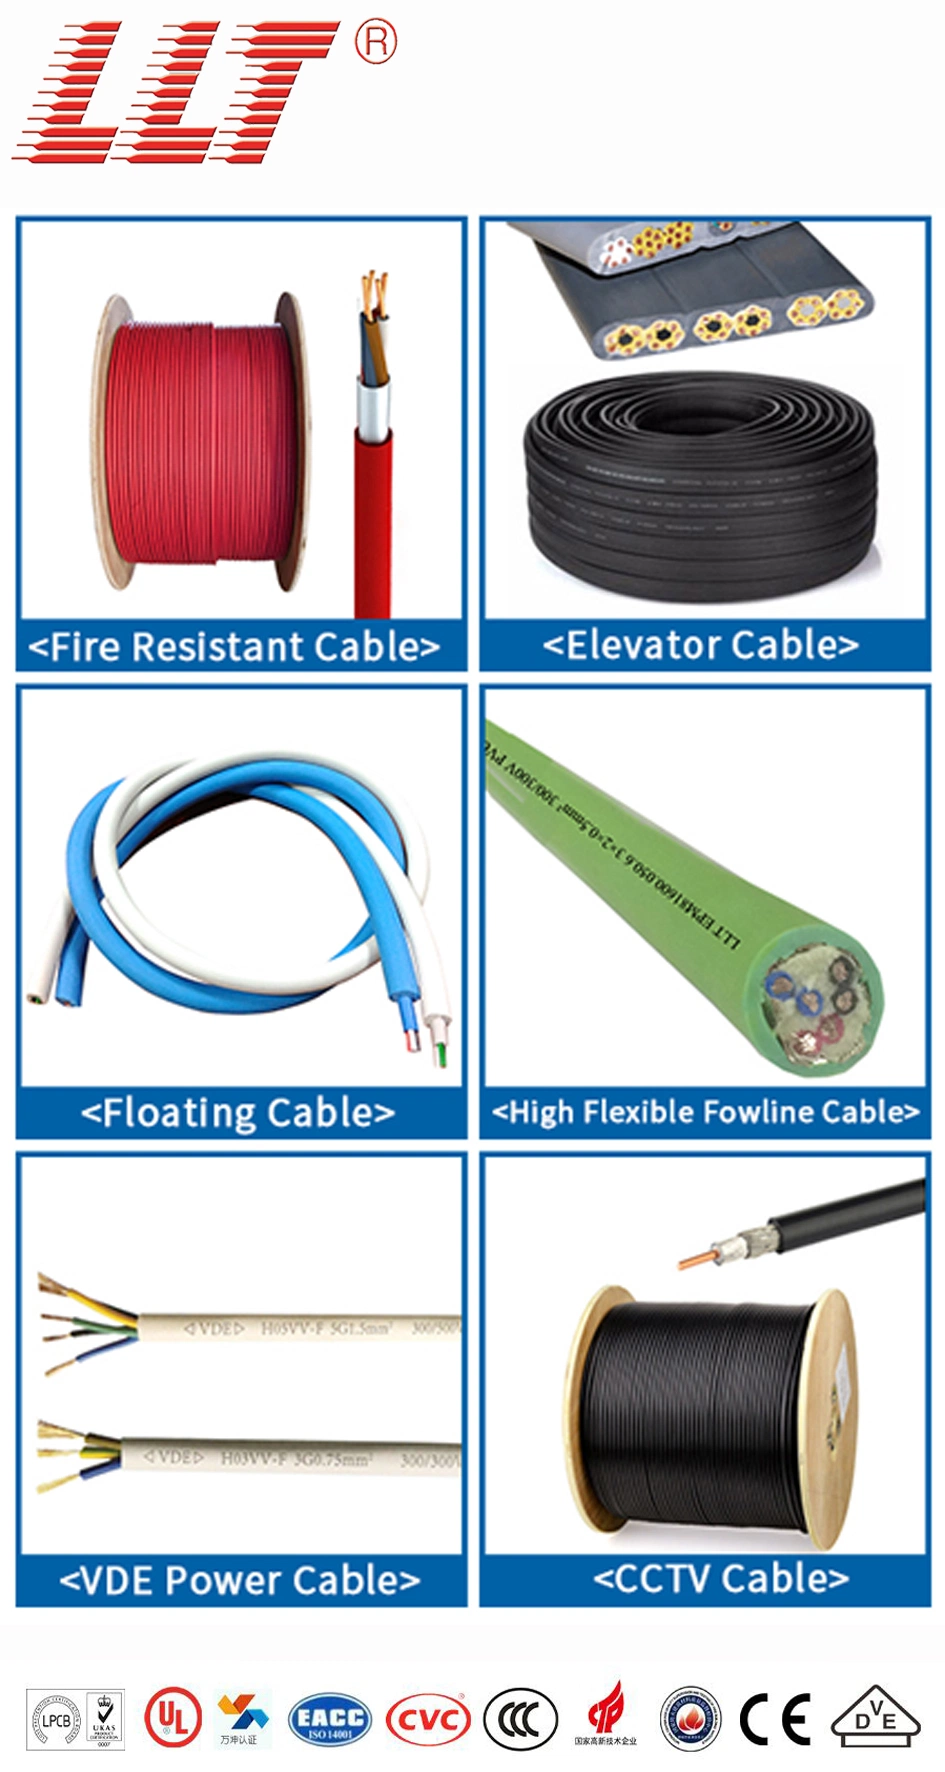 pH120 Cable BS Standard Fire Resistant Cable for Fire Fighting System